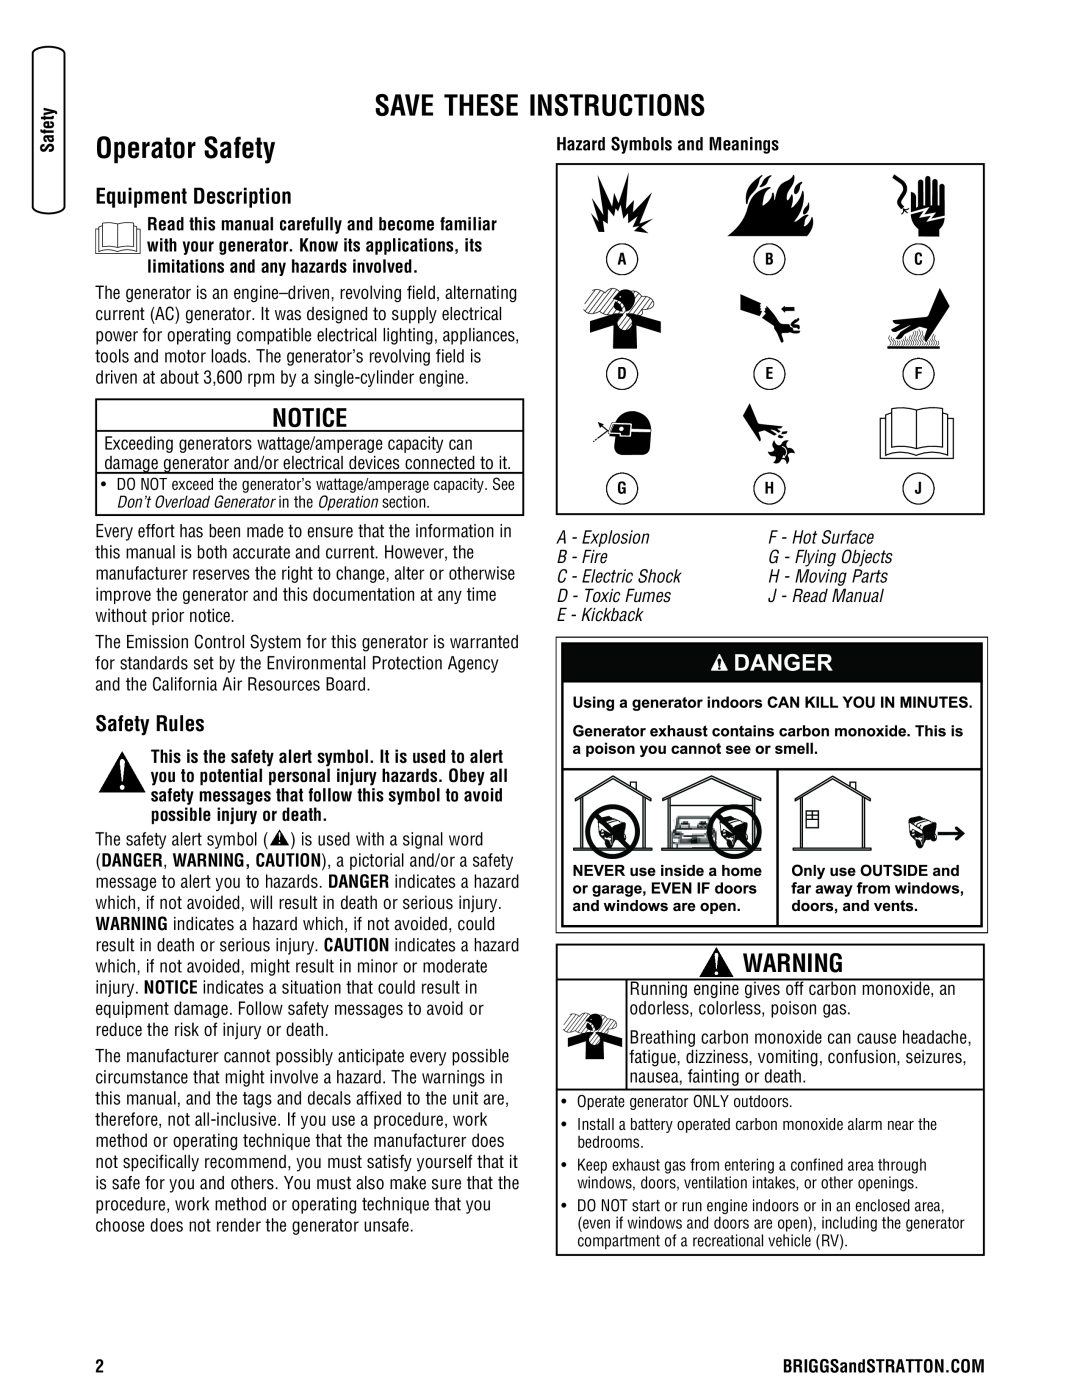 Briggs & Stratton 30348 manual Save These Instructions, Operator Safety, Equipment Description, Safety Rules 